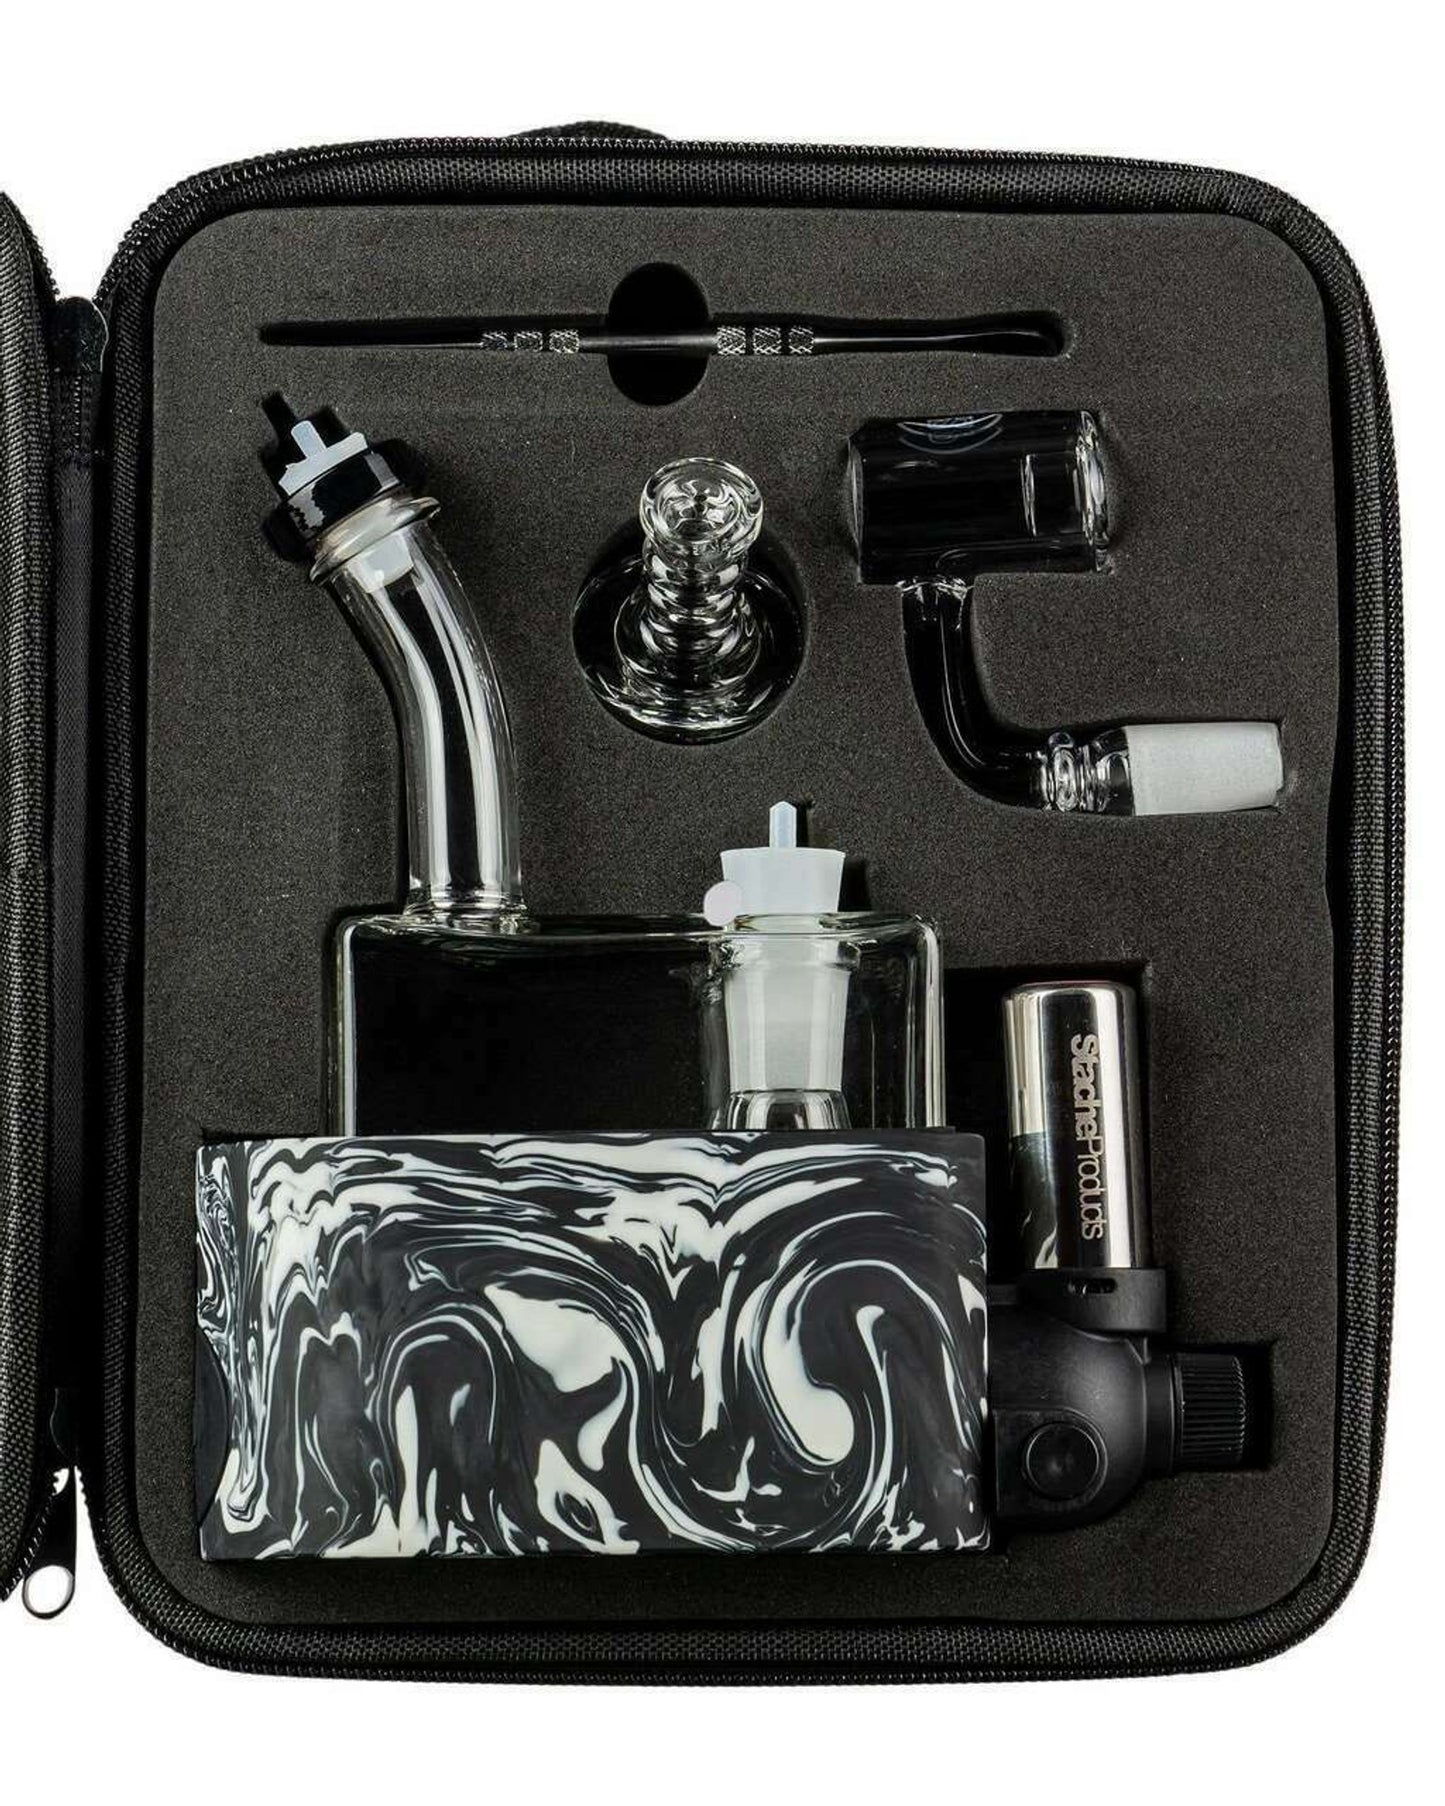 RIG IN ONE BY STACHE PRODUCTS